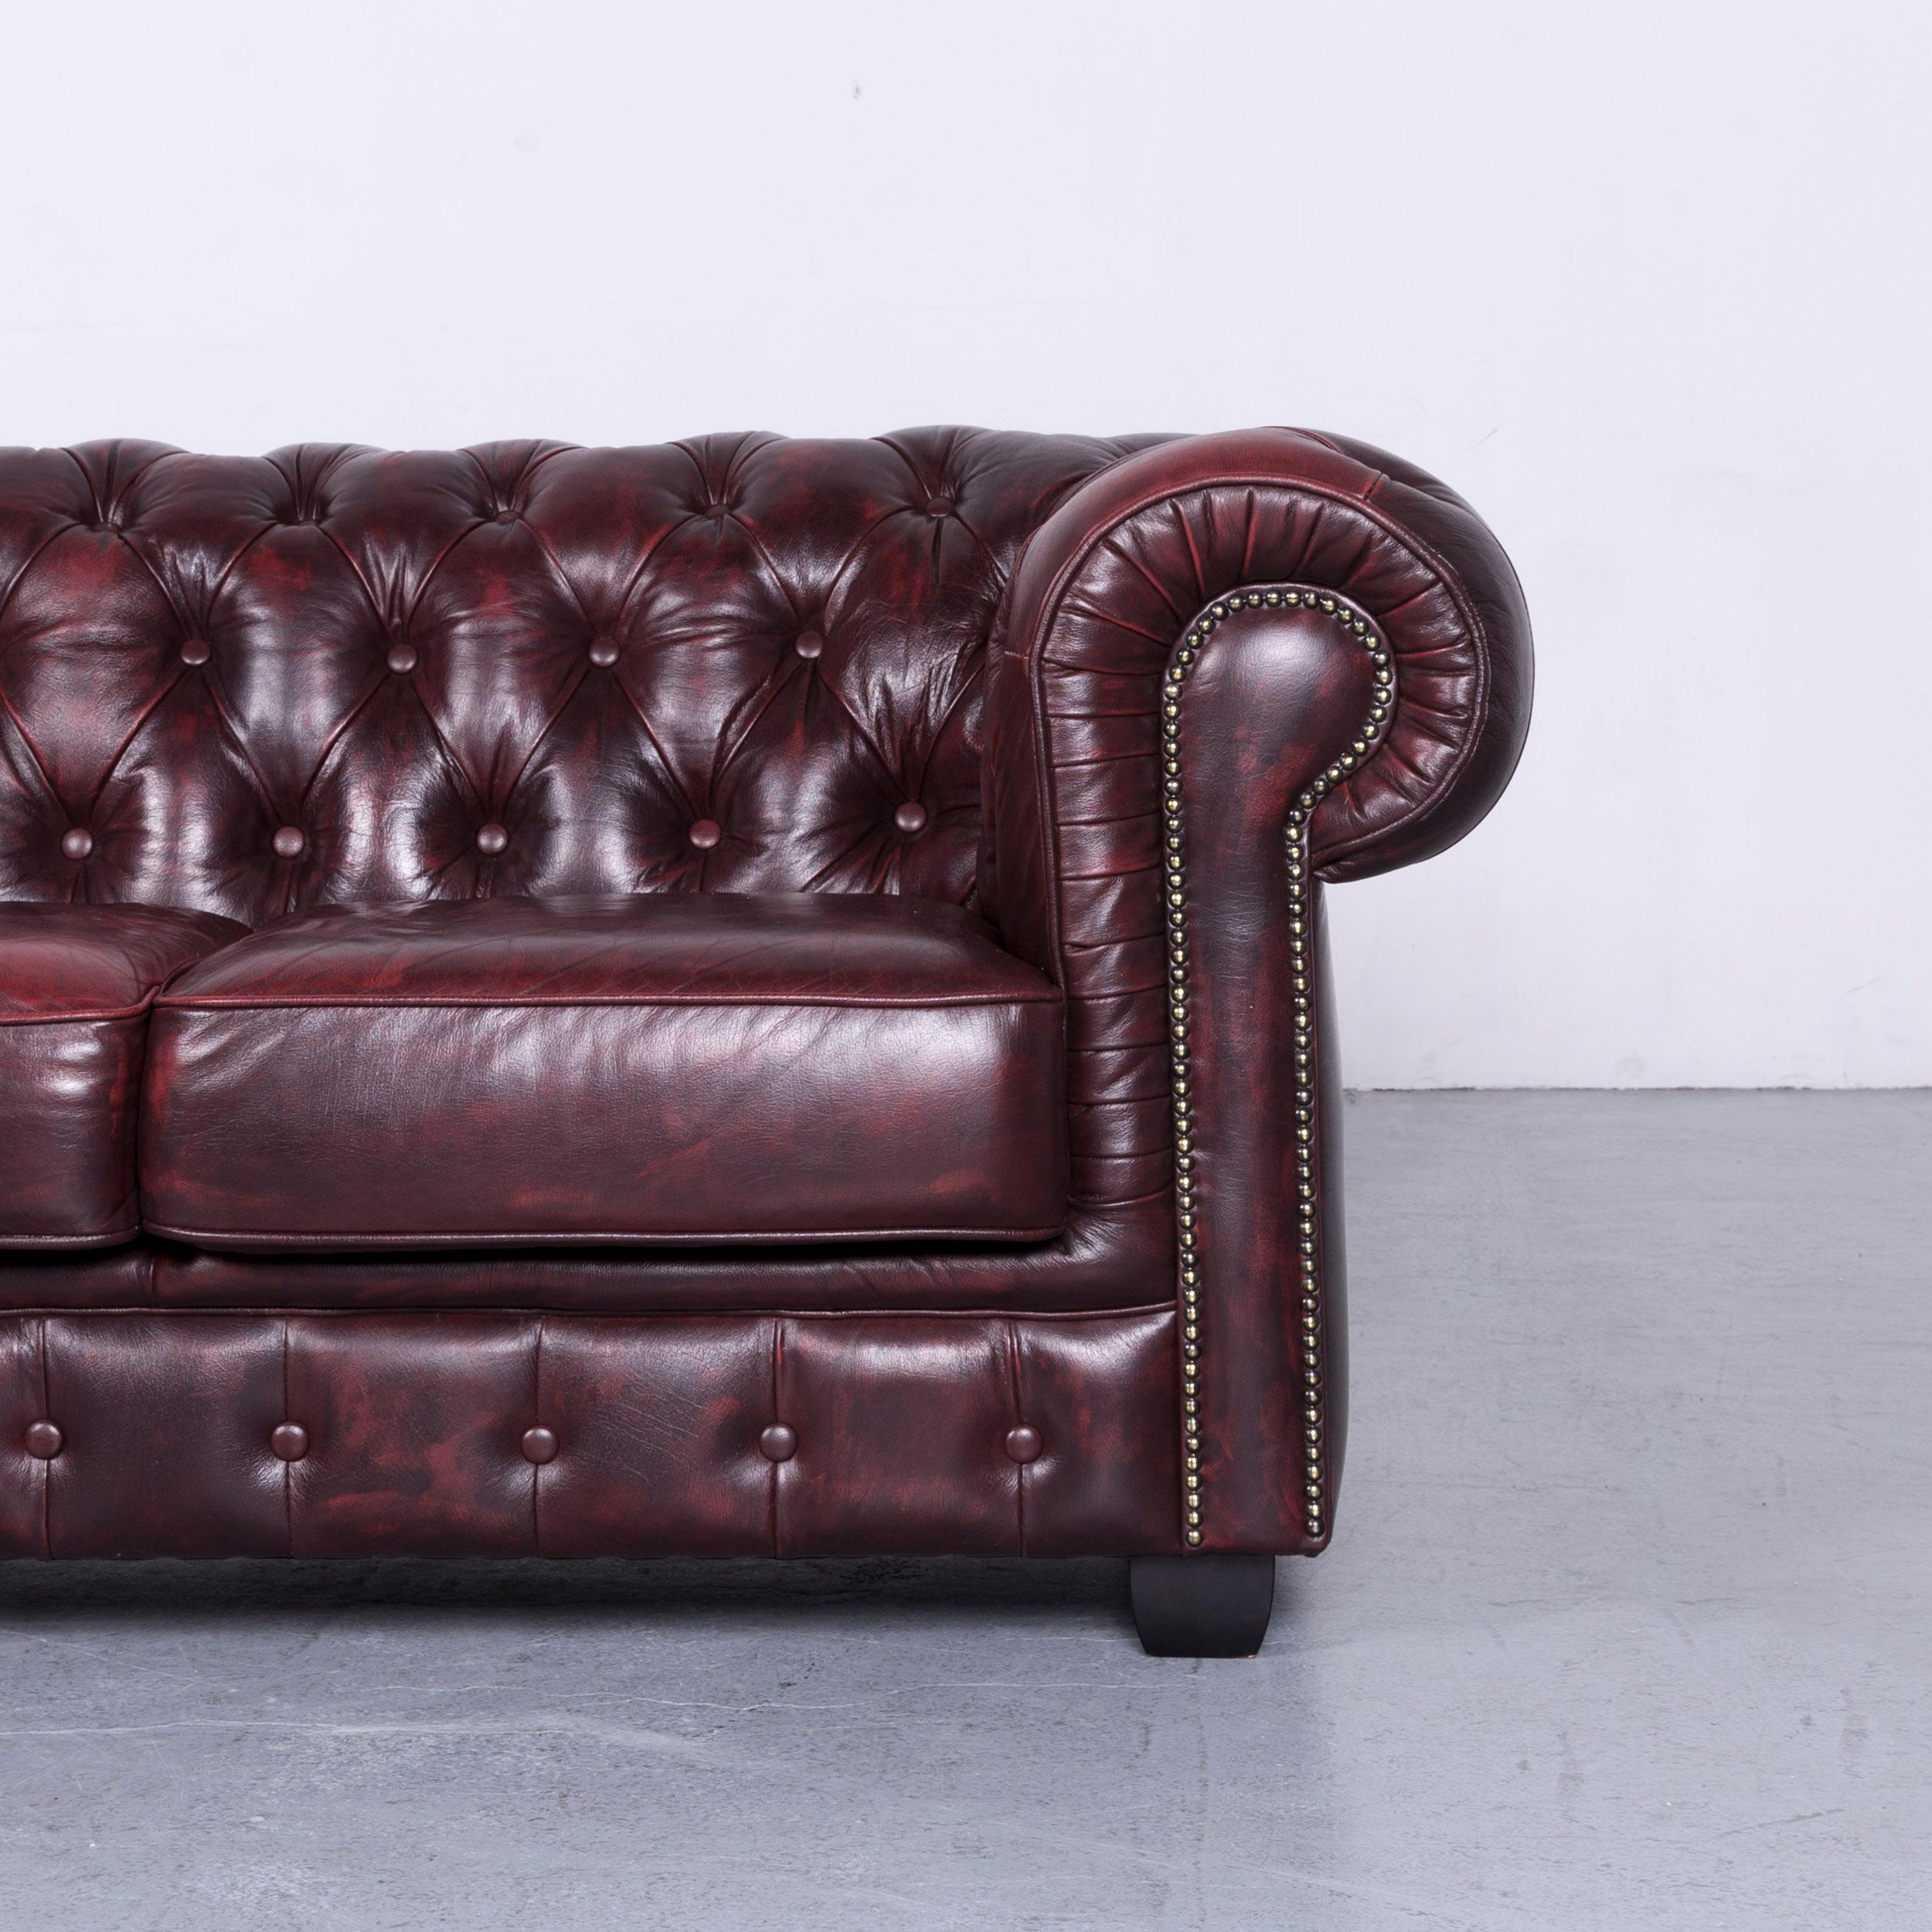 Chesterfield Leather Sofa Brown Three-Seat Couch Vintage Retro 10